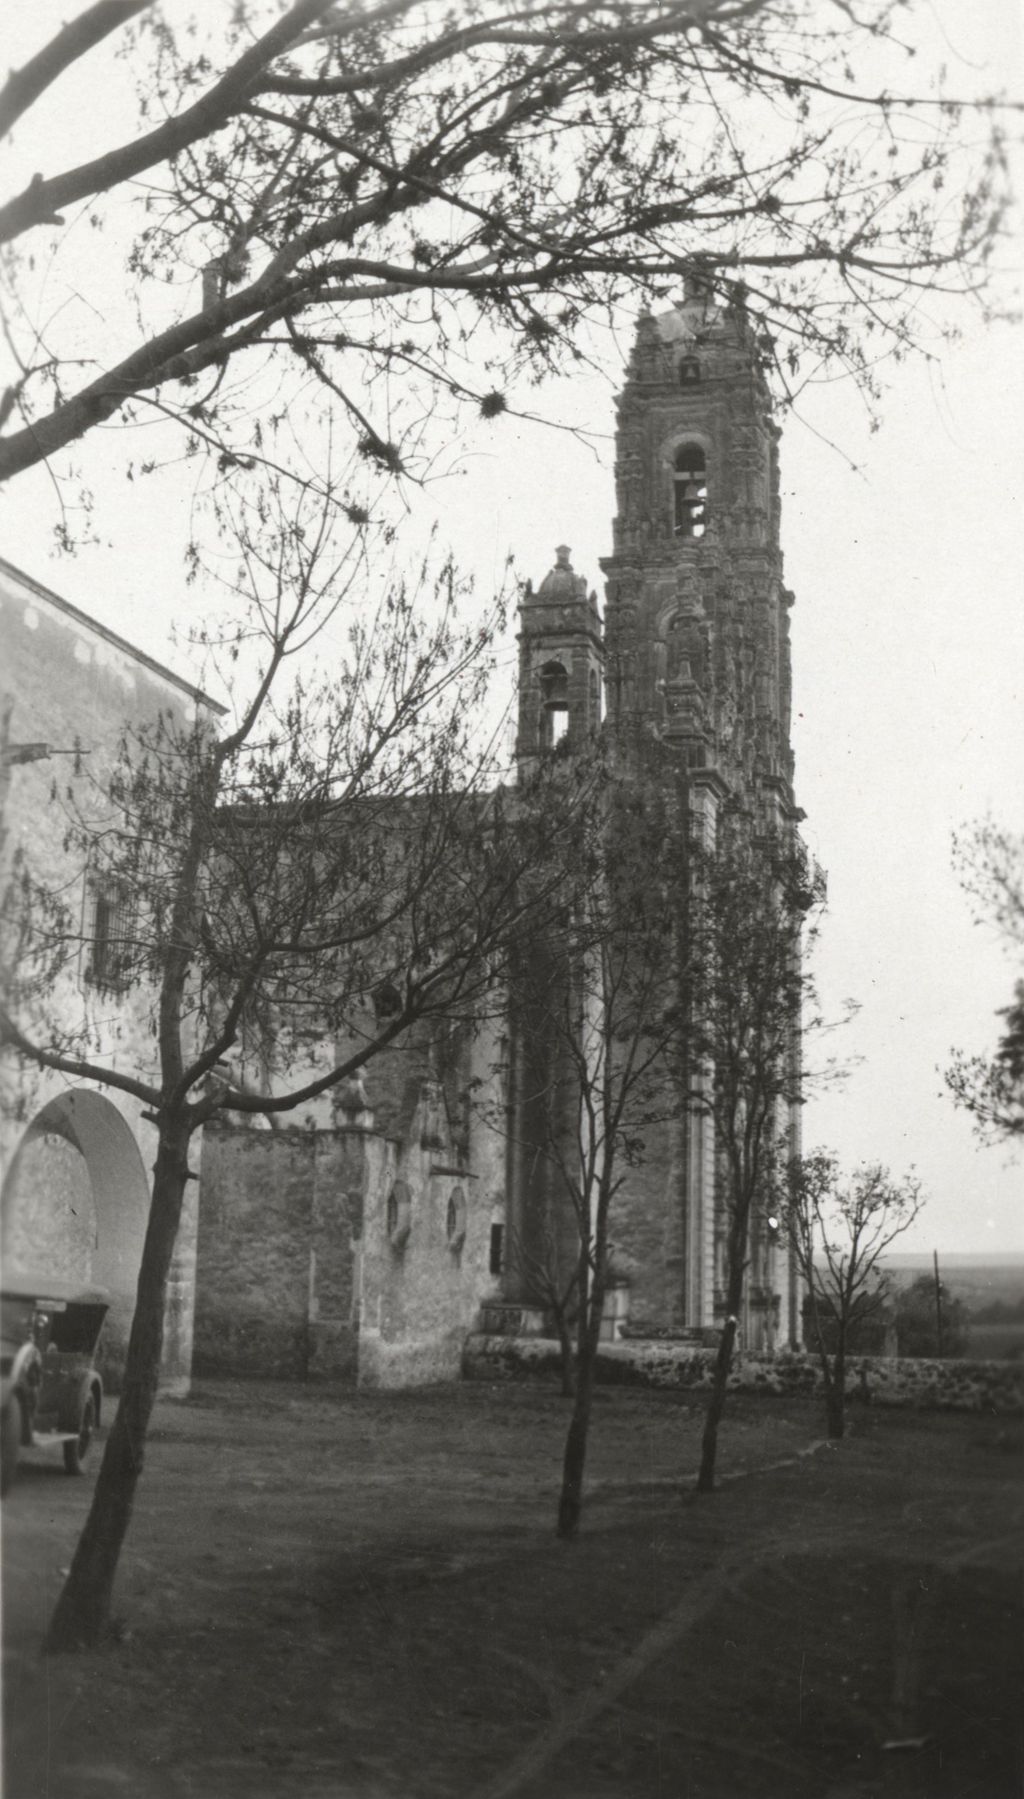 Church photographed on Jane Addams' trip to Mexico